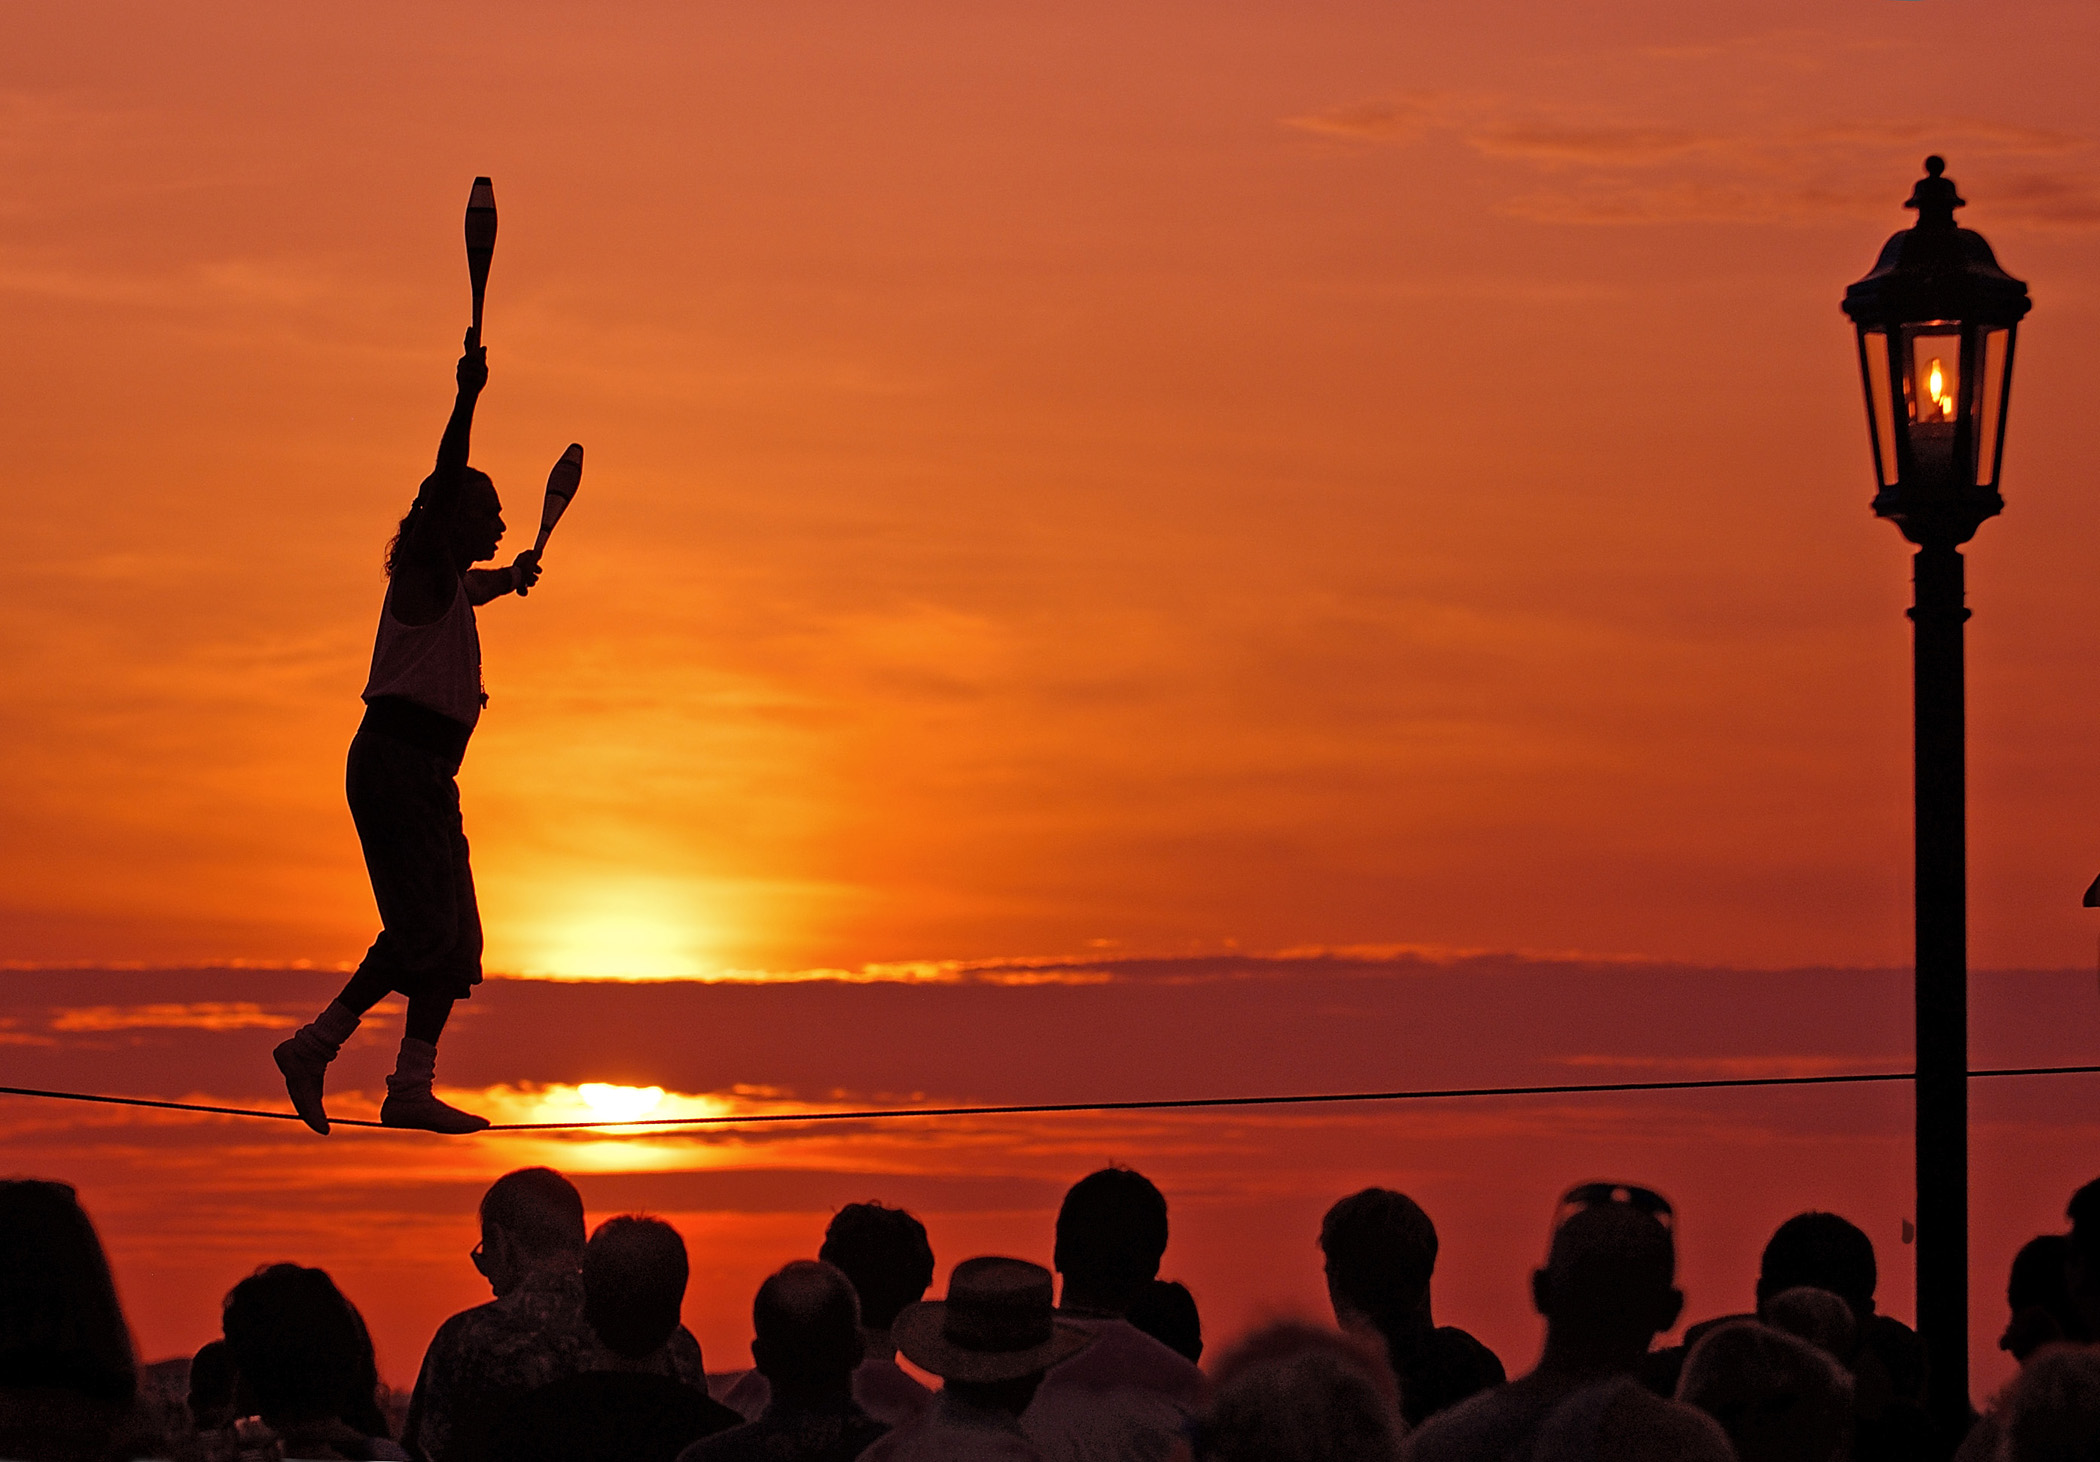 Photo #75988: Tightrope Walker at Sunset Celebration | America's Byways